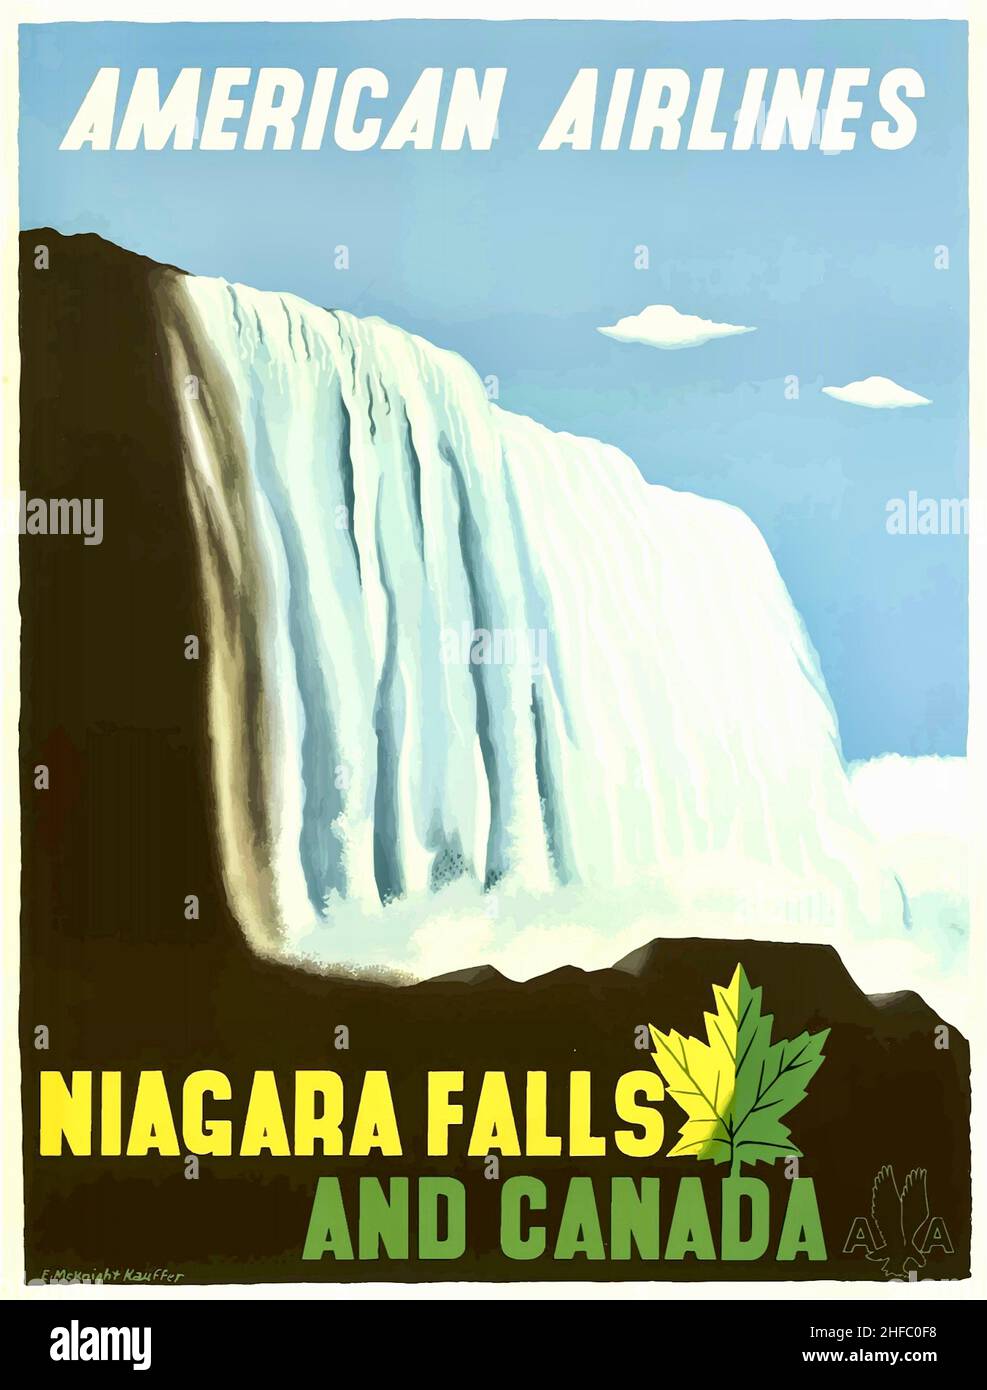 American Airlines - Niagara Falls and Canada travel poster. Stock Photo